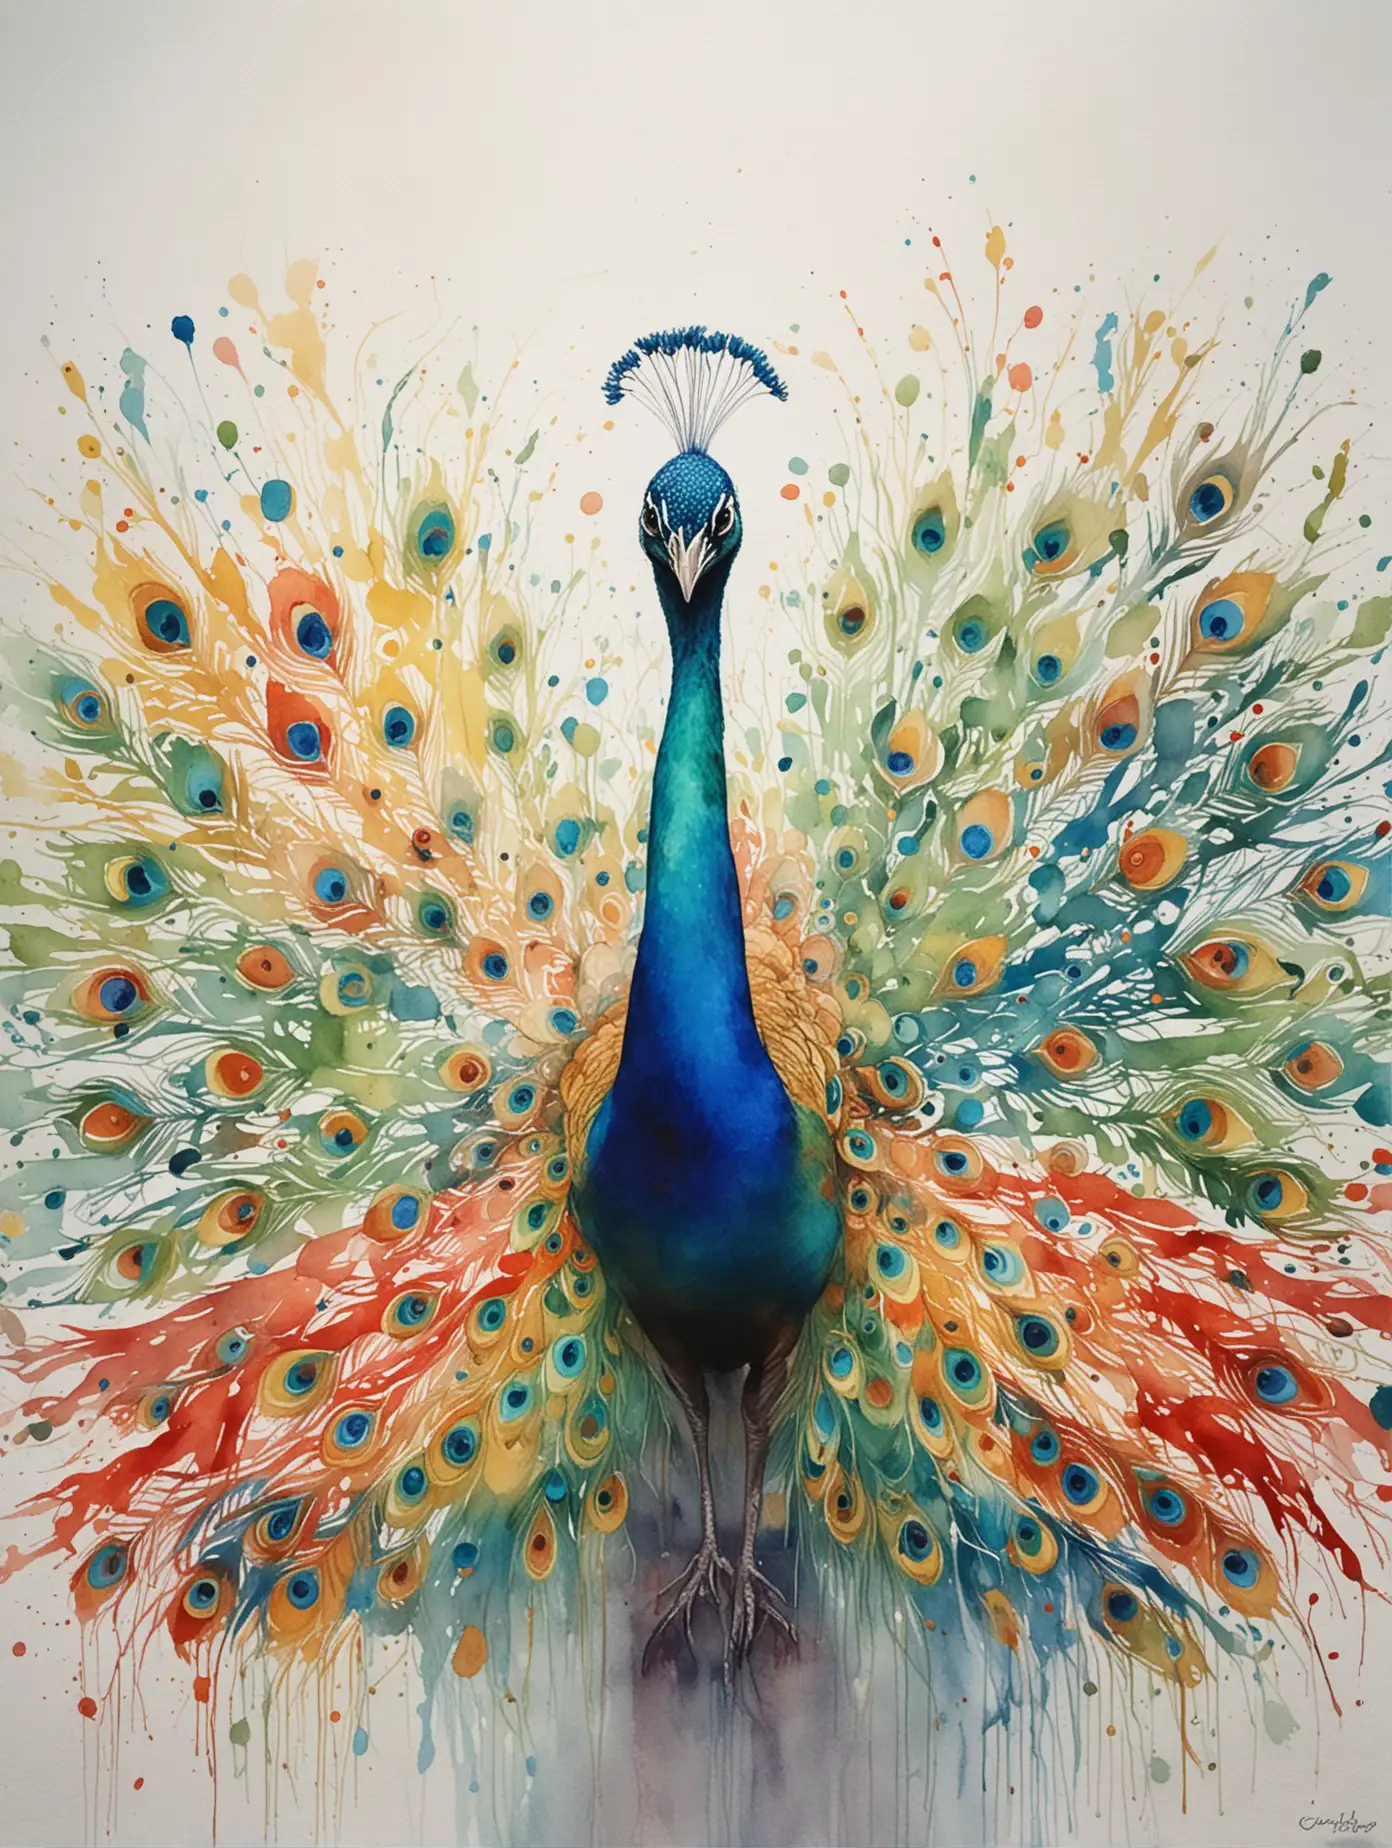 A full cavas captivating red, blue, yellow and green clean, artistic, symbolic, colorful, expressive, minimalist, watercolor, illustration of a peacock.